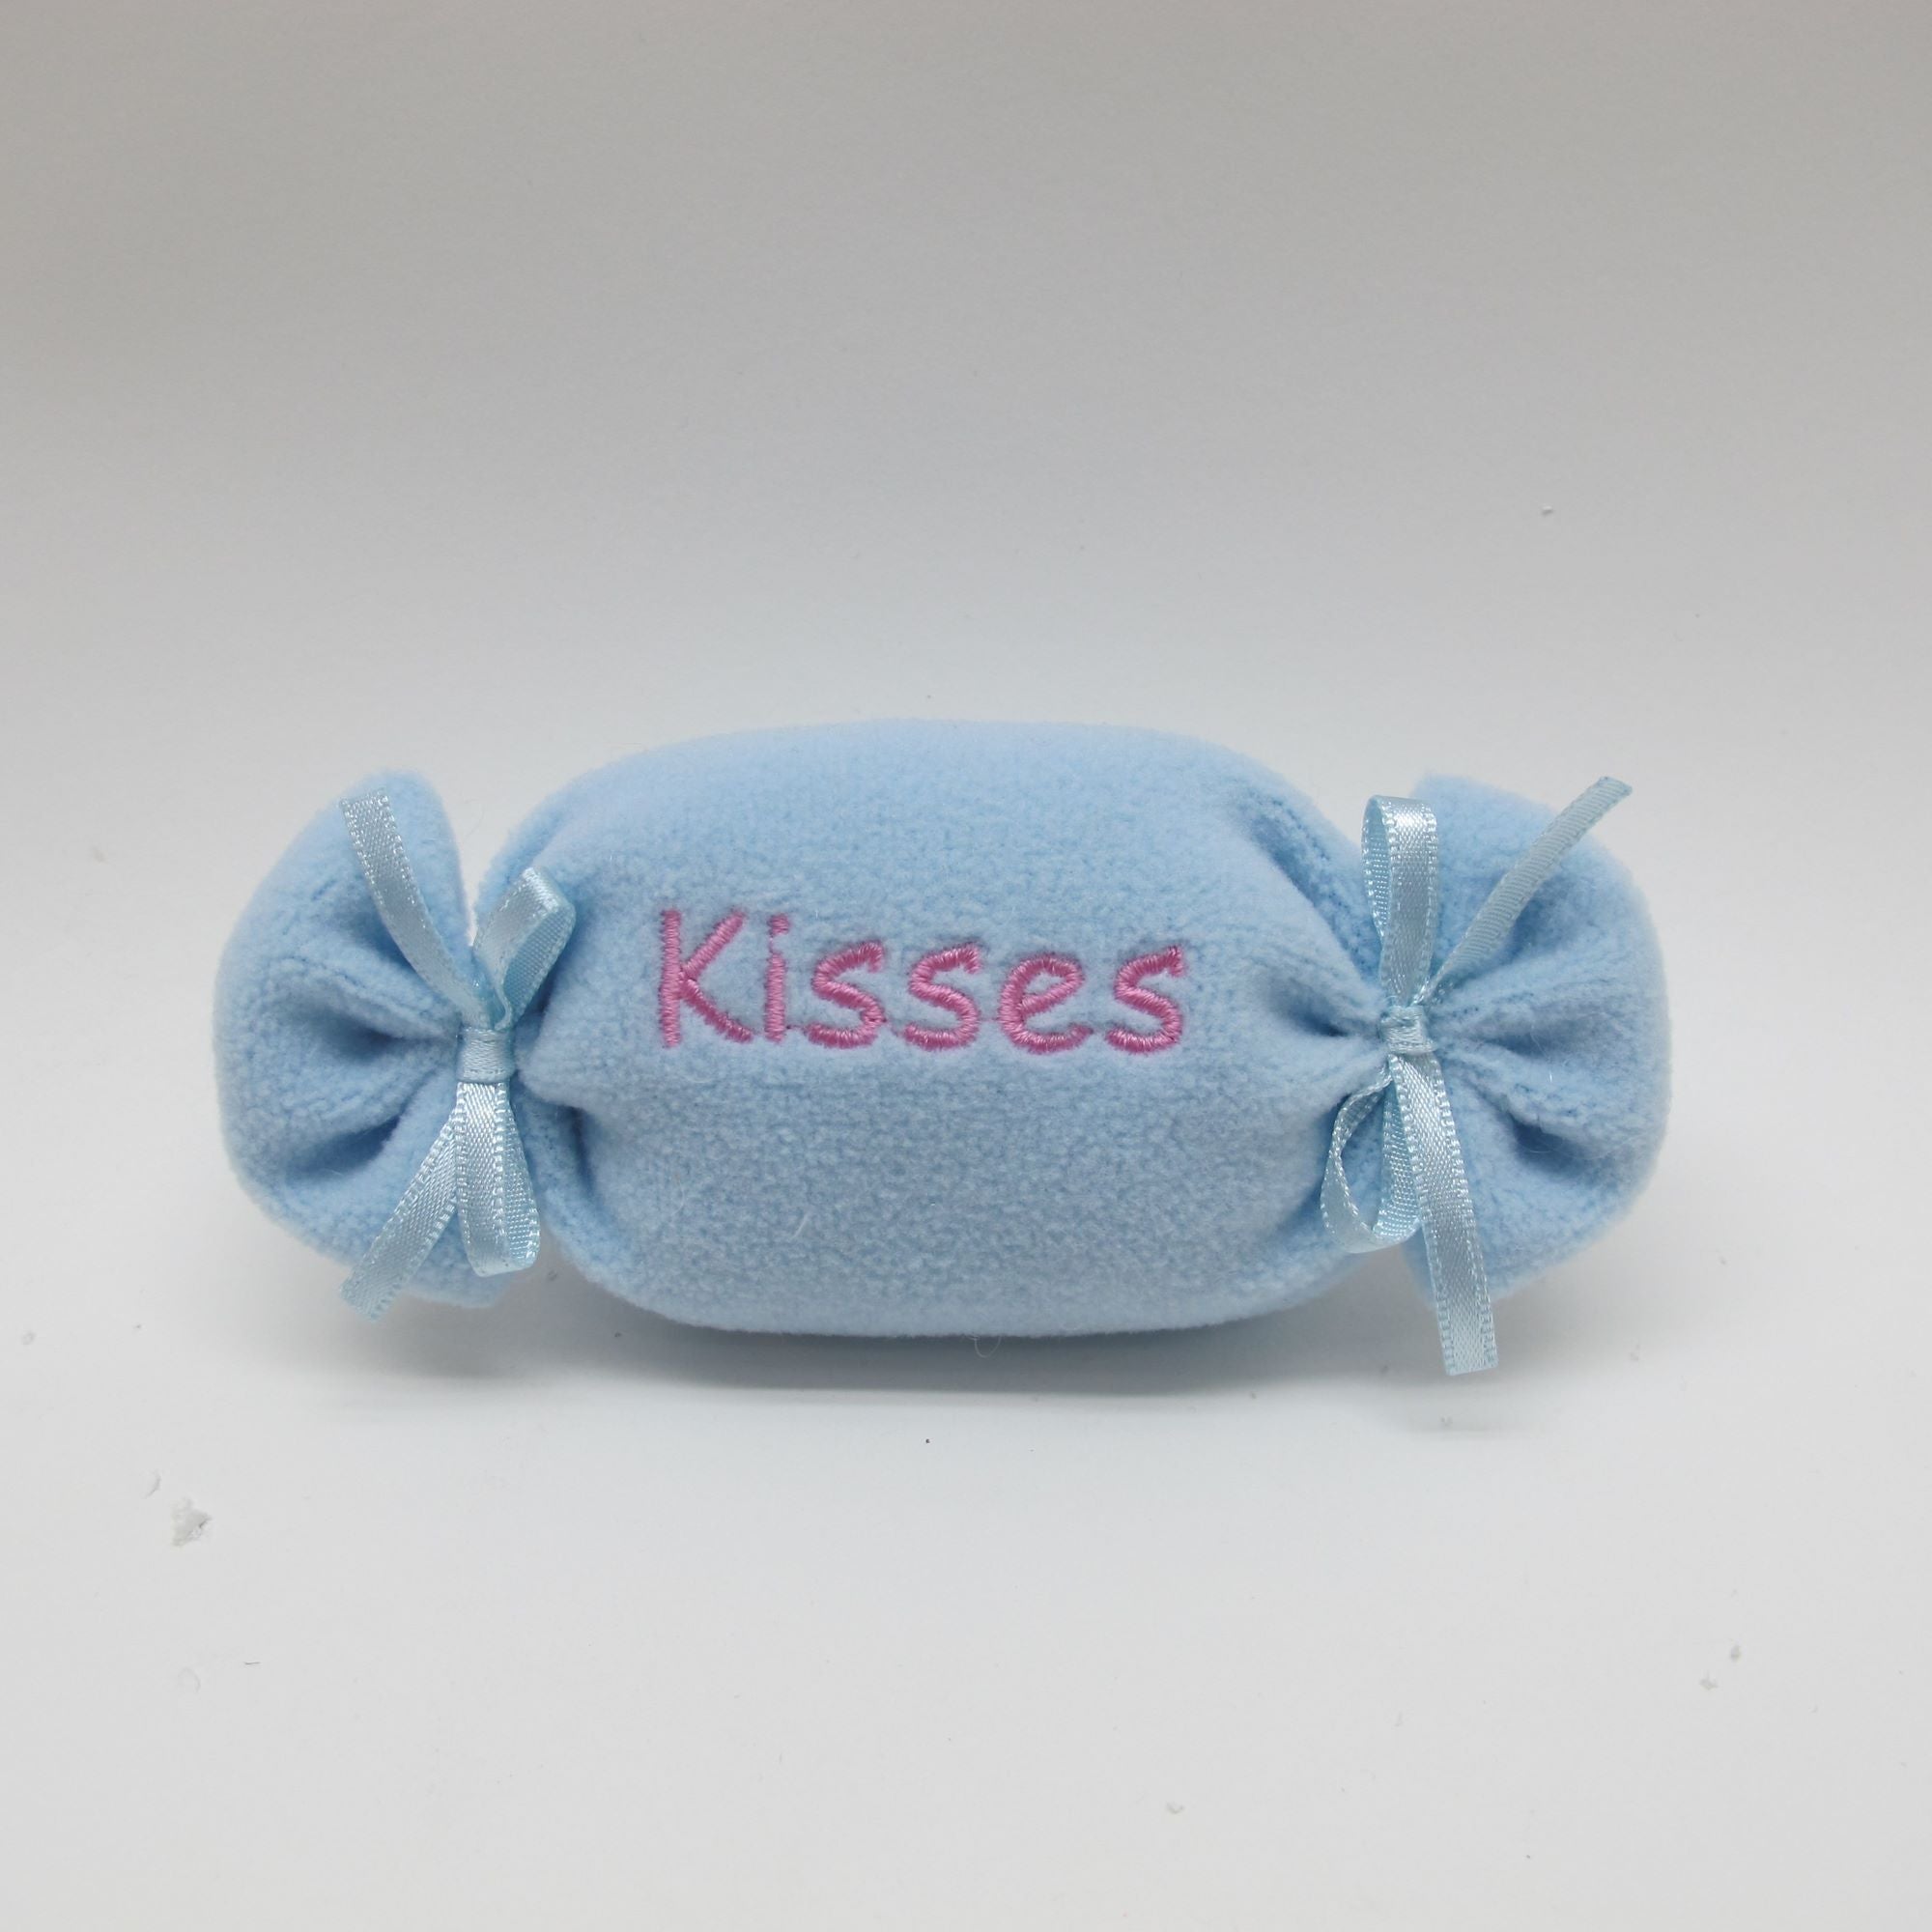 HEART WITH EMBROIDER "KISSES"